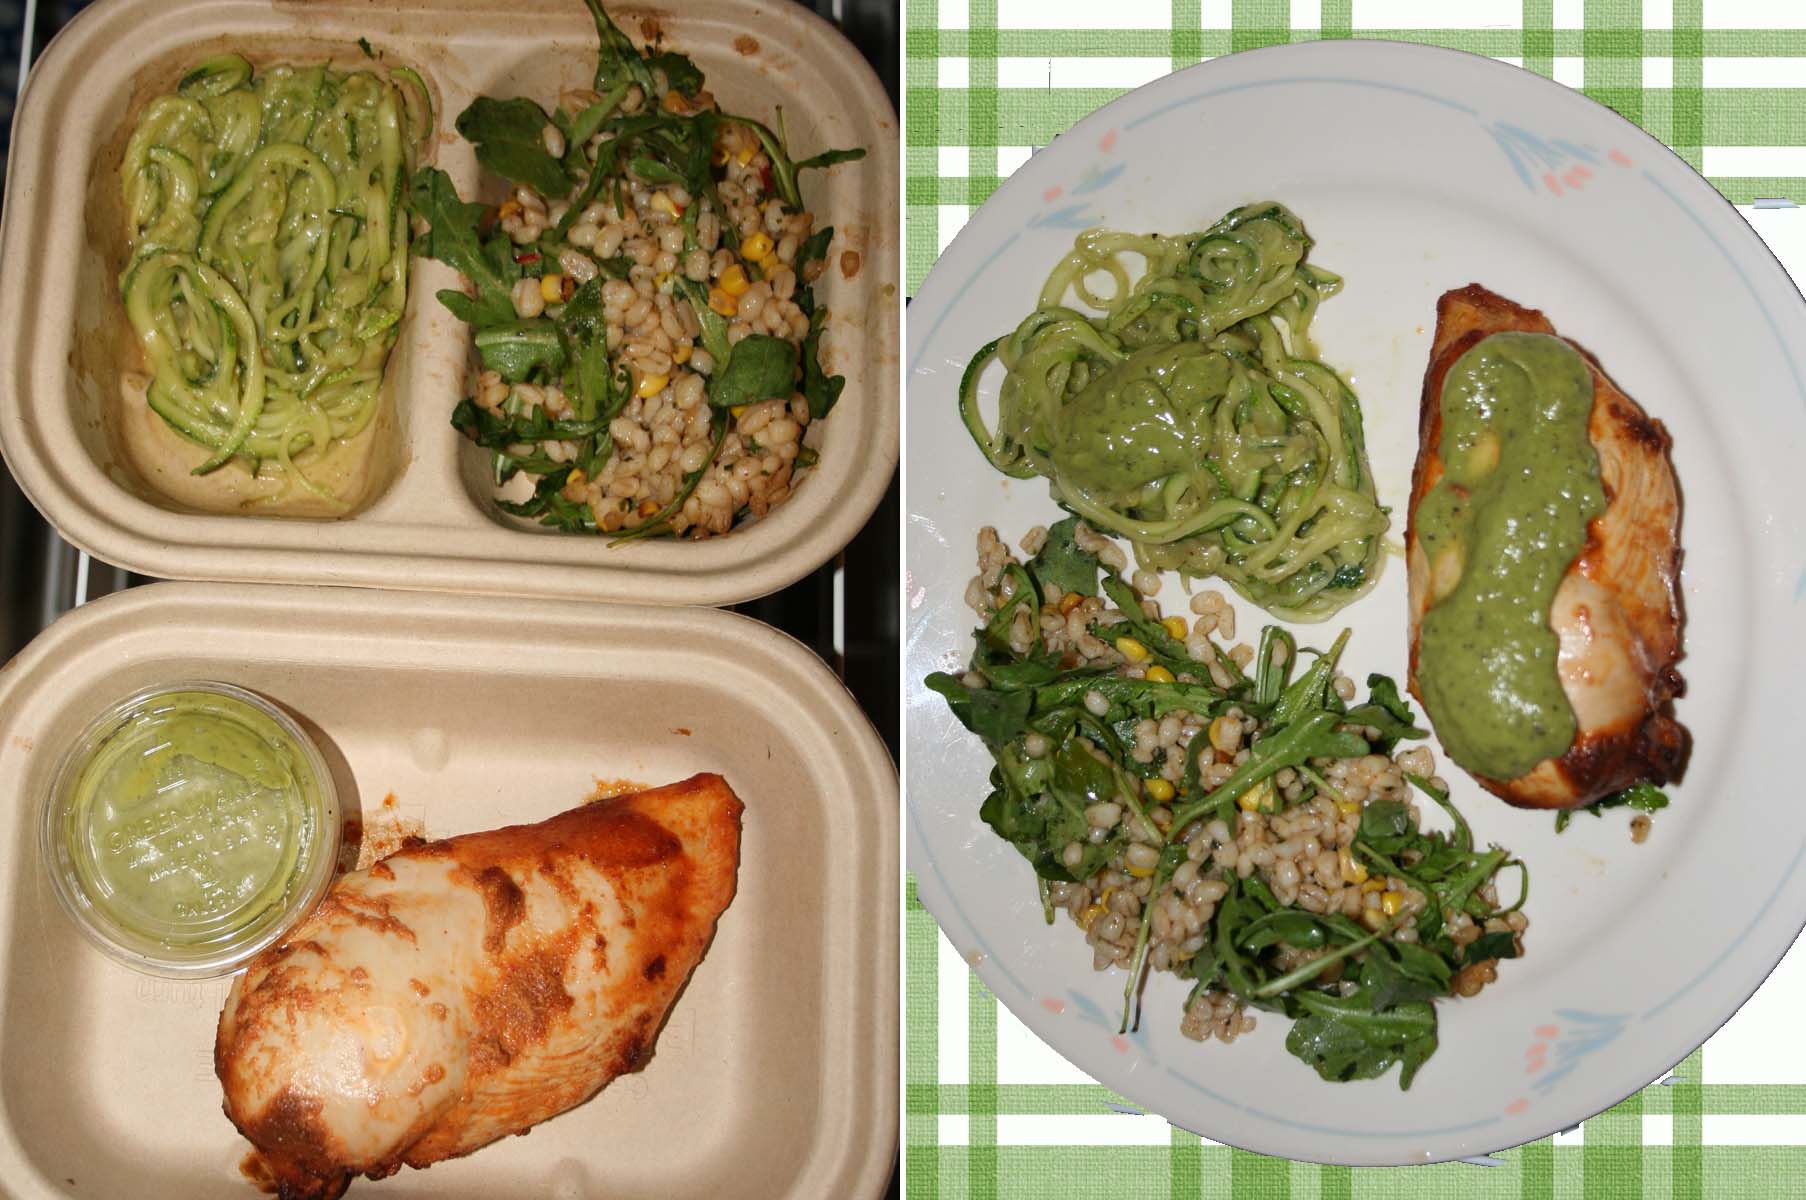 The chicken and salad were tasty, but the zucchini "pasta" was limp. (Photos: Mark Heckathorn/DC on Heels)